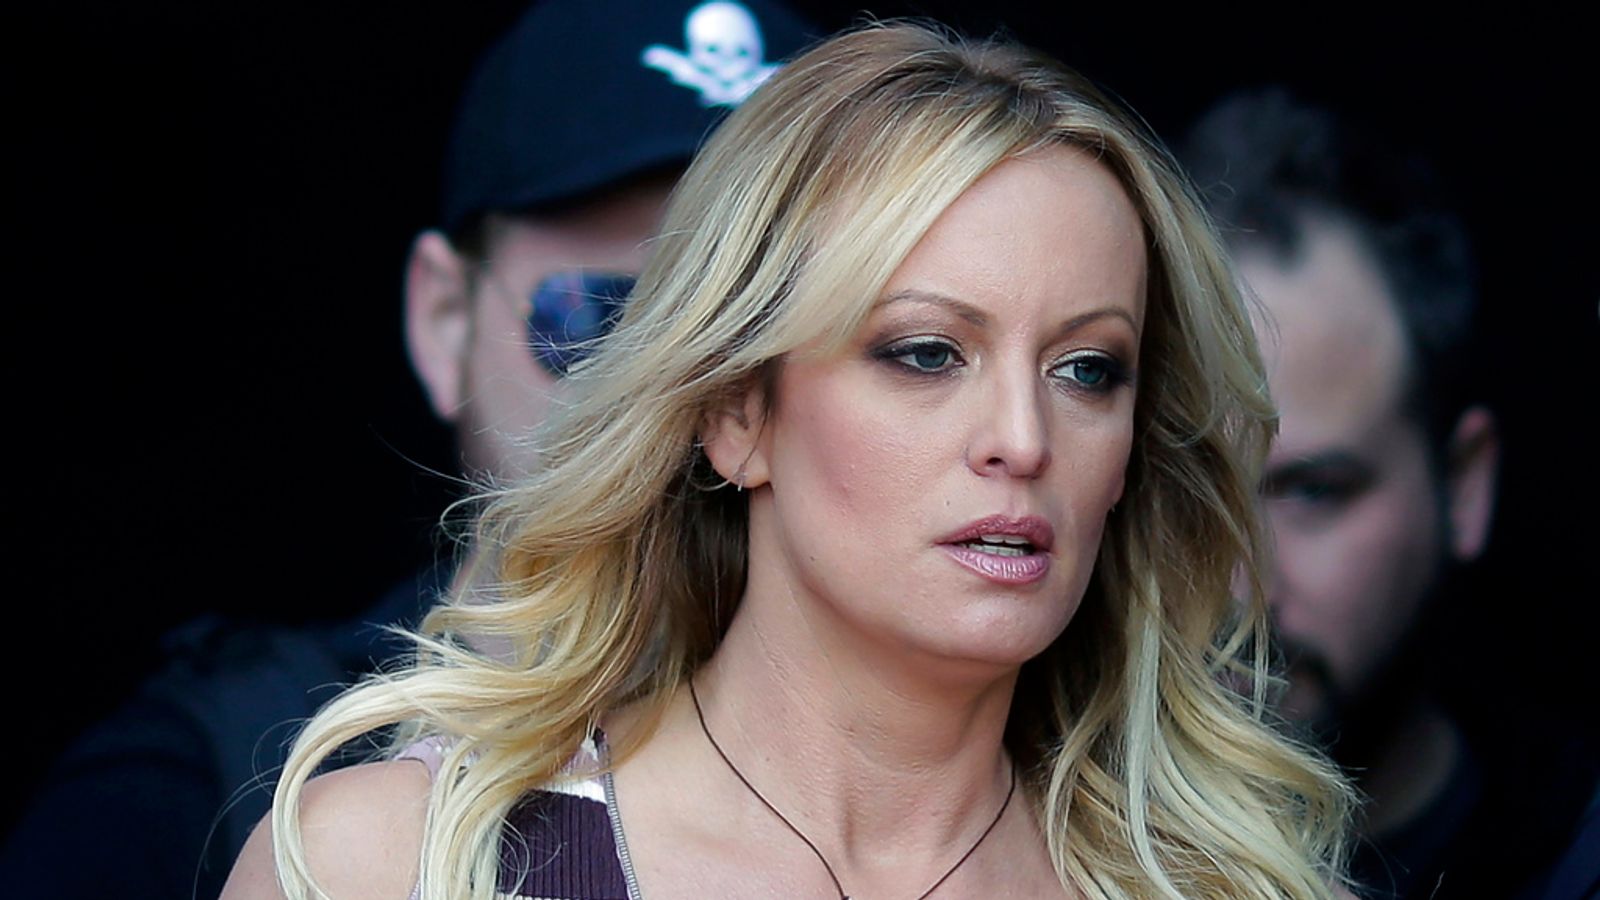 Donald Trump indicted: Who is Stormy Daniels and what is former president accused of doing?